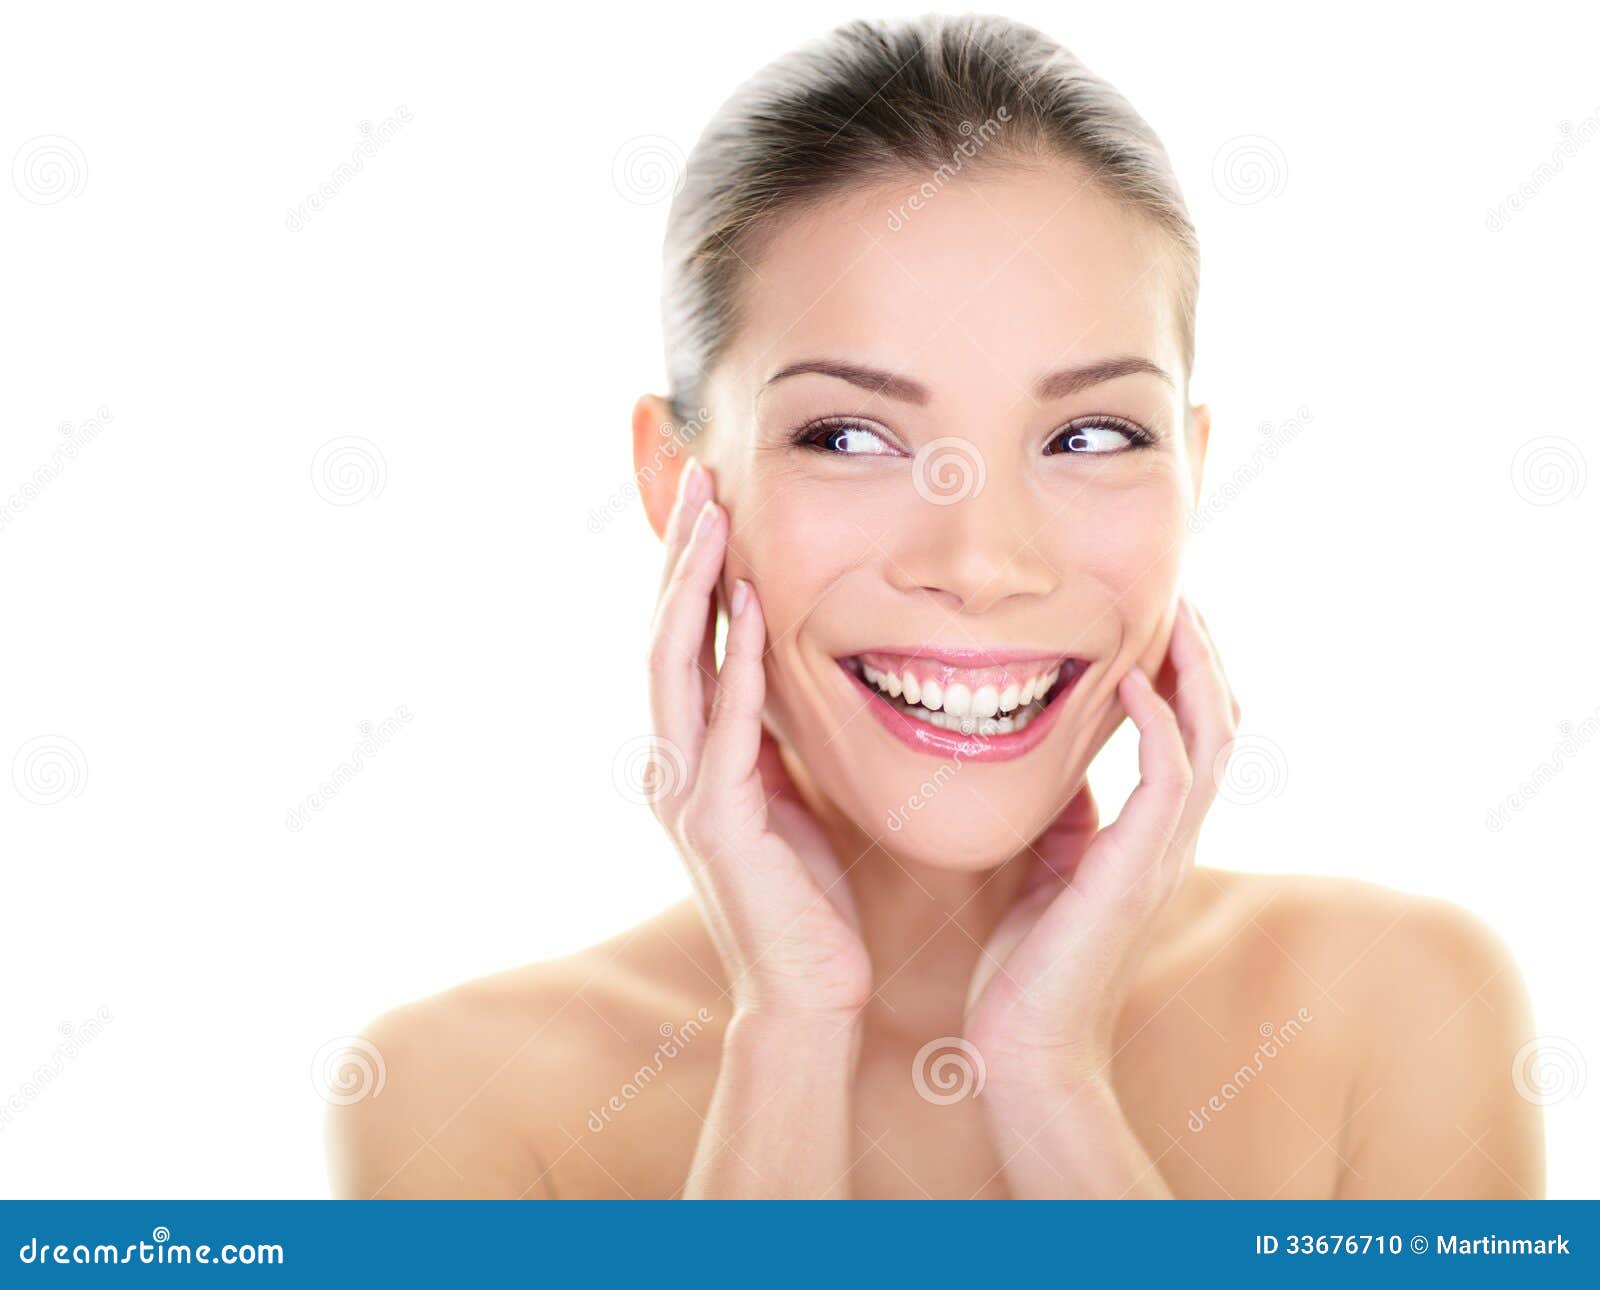 beauty-skin-care-woman-looking-to-side-happy-laughing-skincare-asian-beautiful-touching-face-perfect-away-33676710.jpg